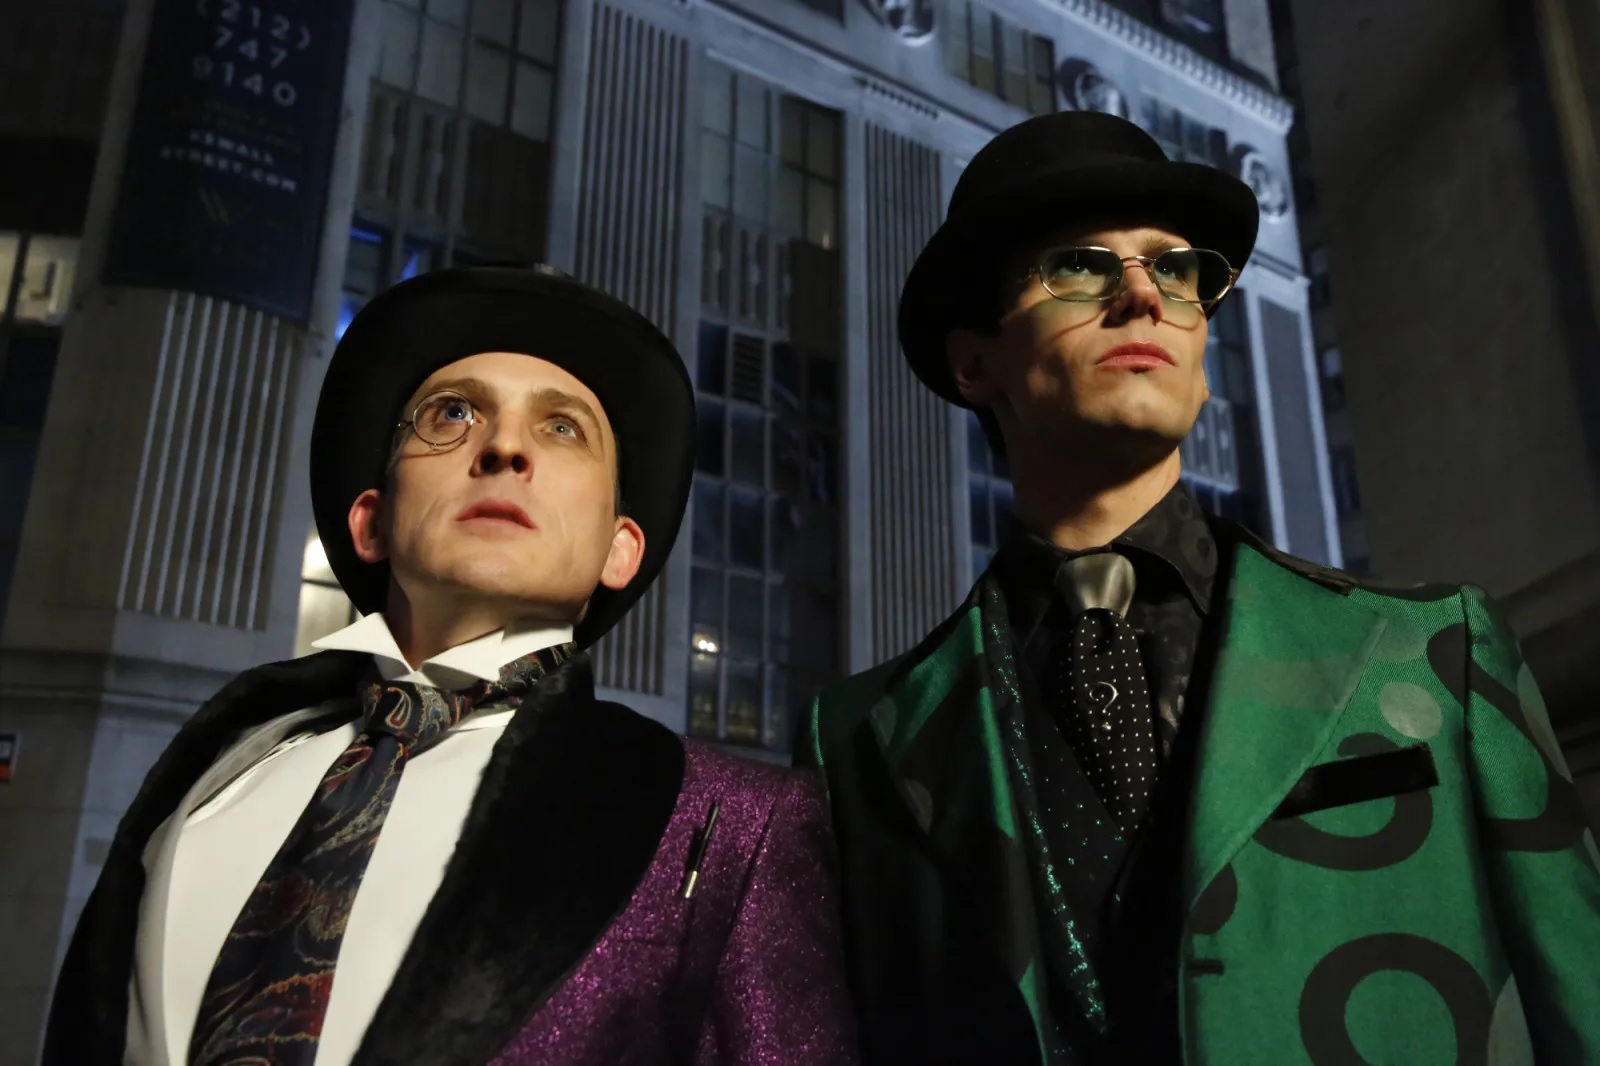 Penguin (Robin Lord-Taylor) and the Riddler (Cory Michael Smith) dressed in their classic comics costumes in the series Gotham.